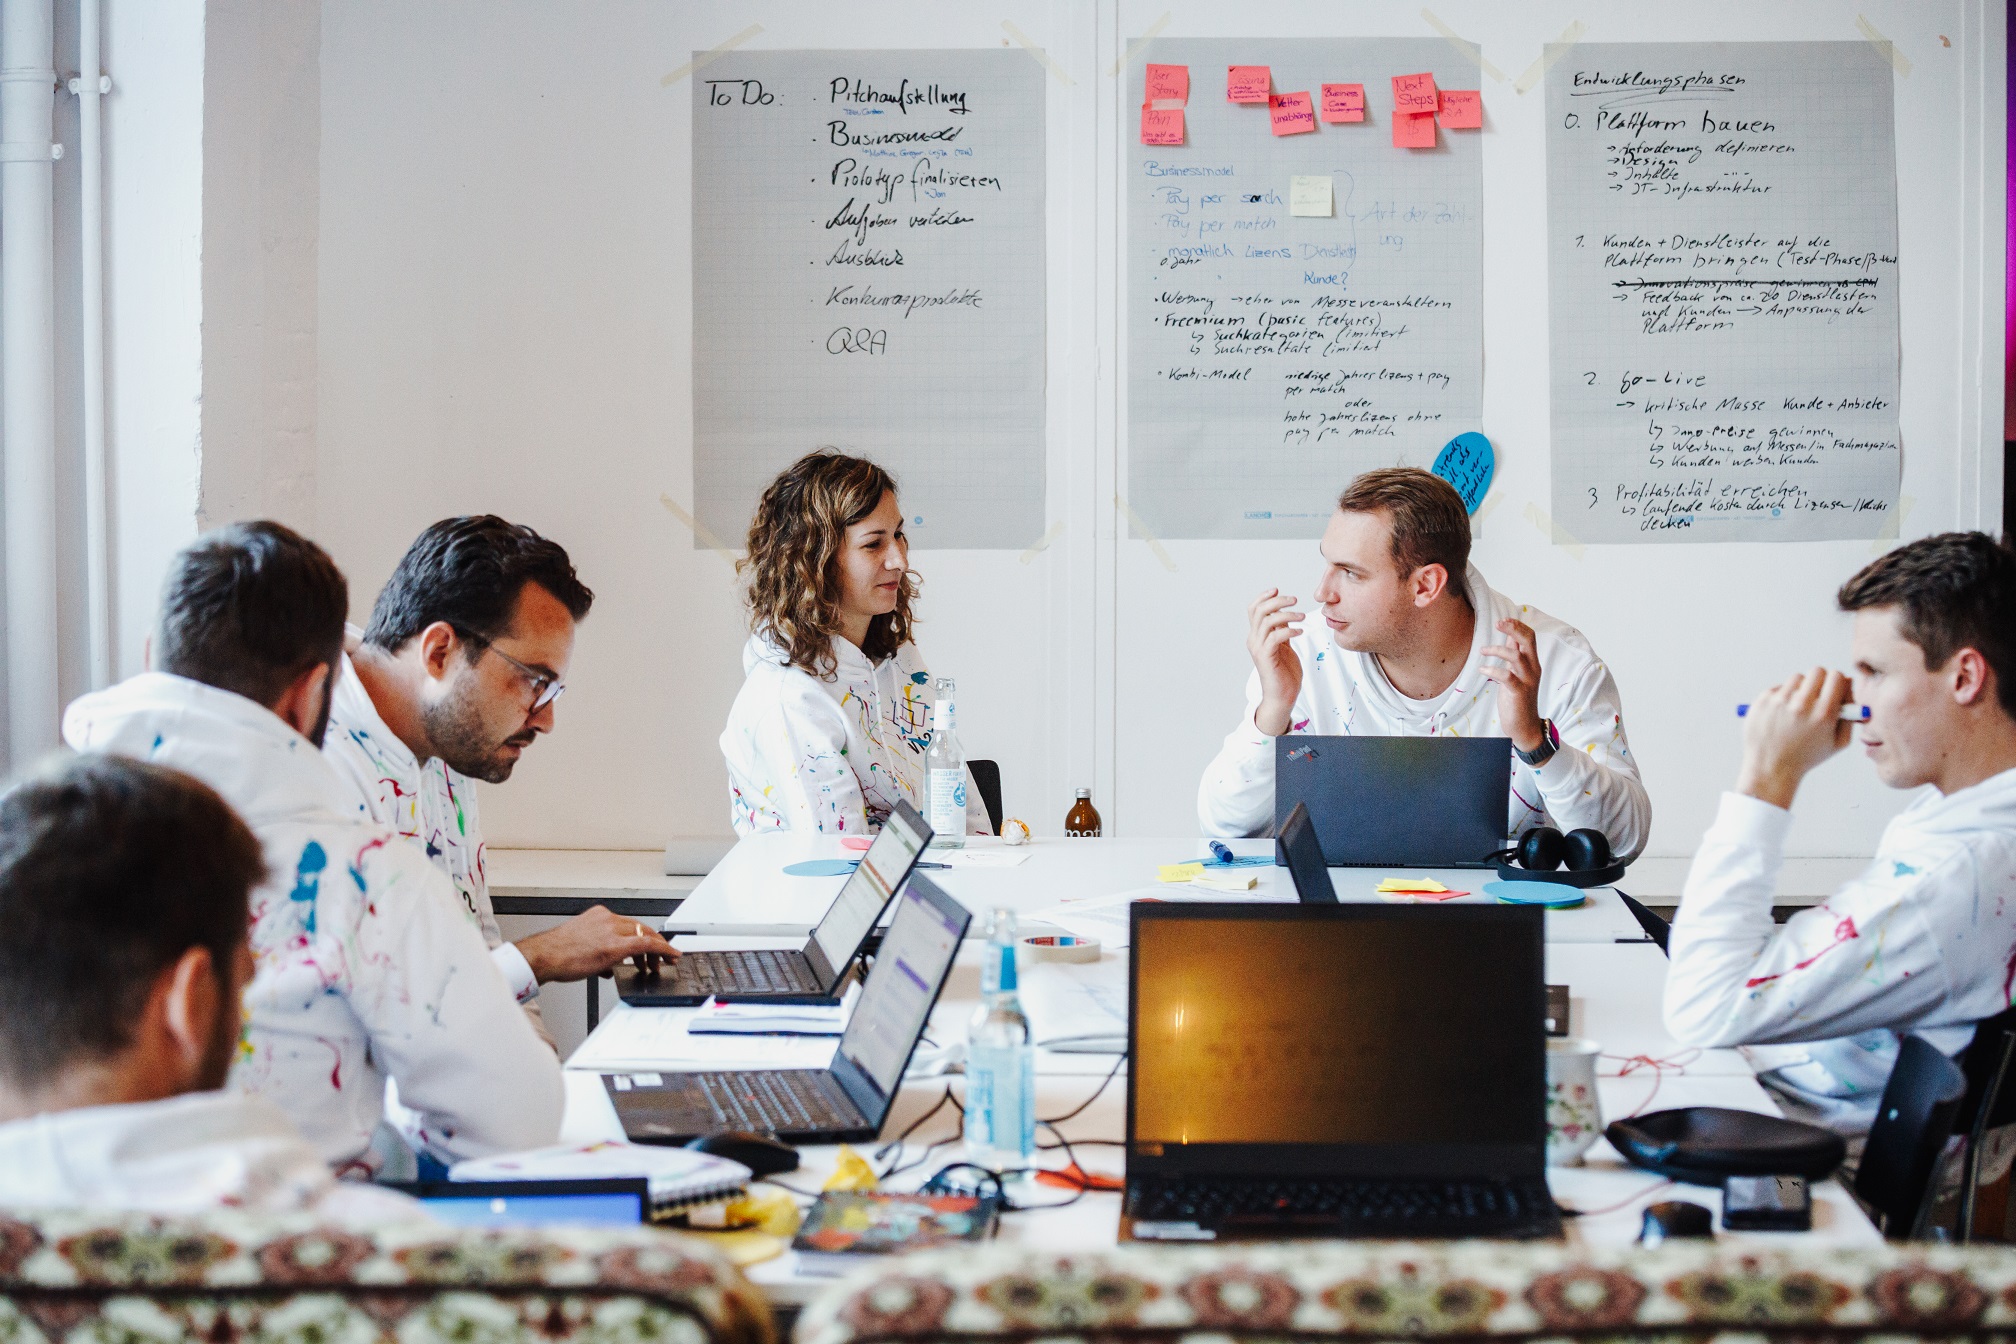 © Vetter Pharma International GmbH: Using creative thinking to move ideas forward: The project teams discuss their approaches.